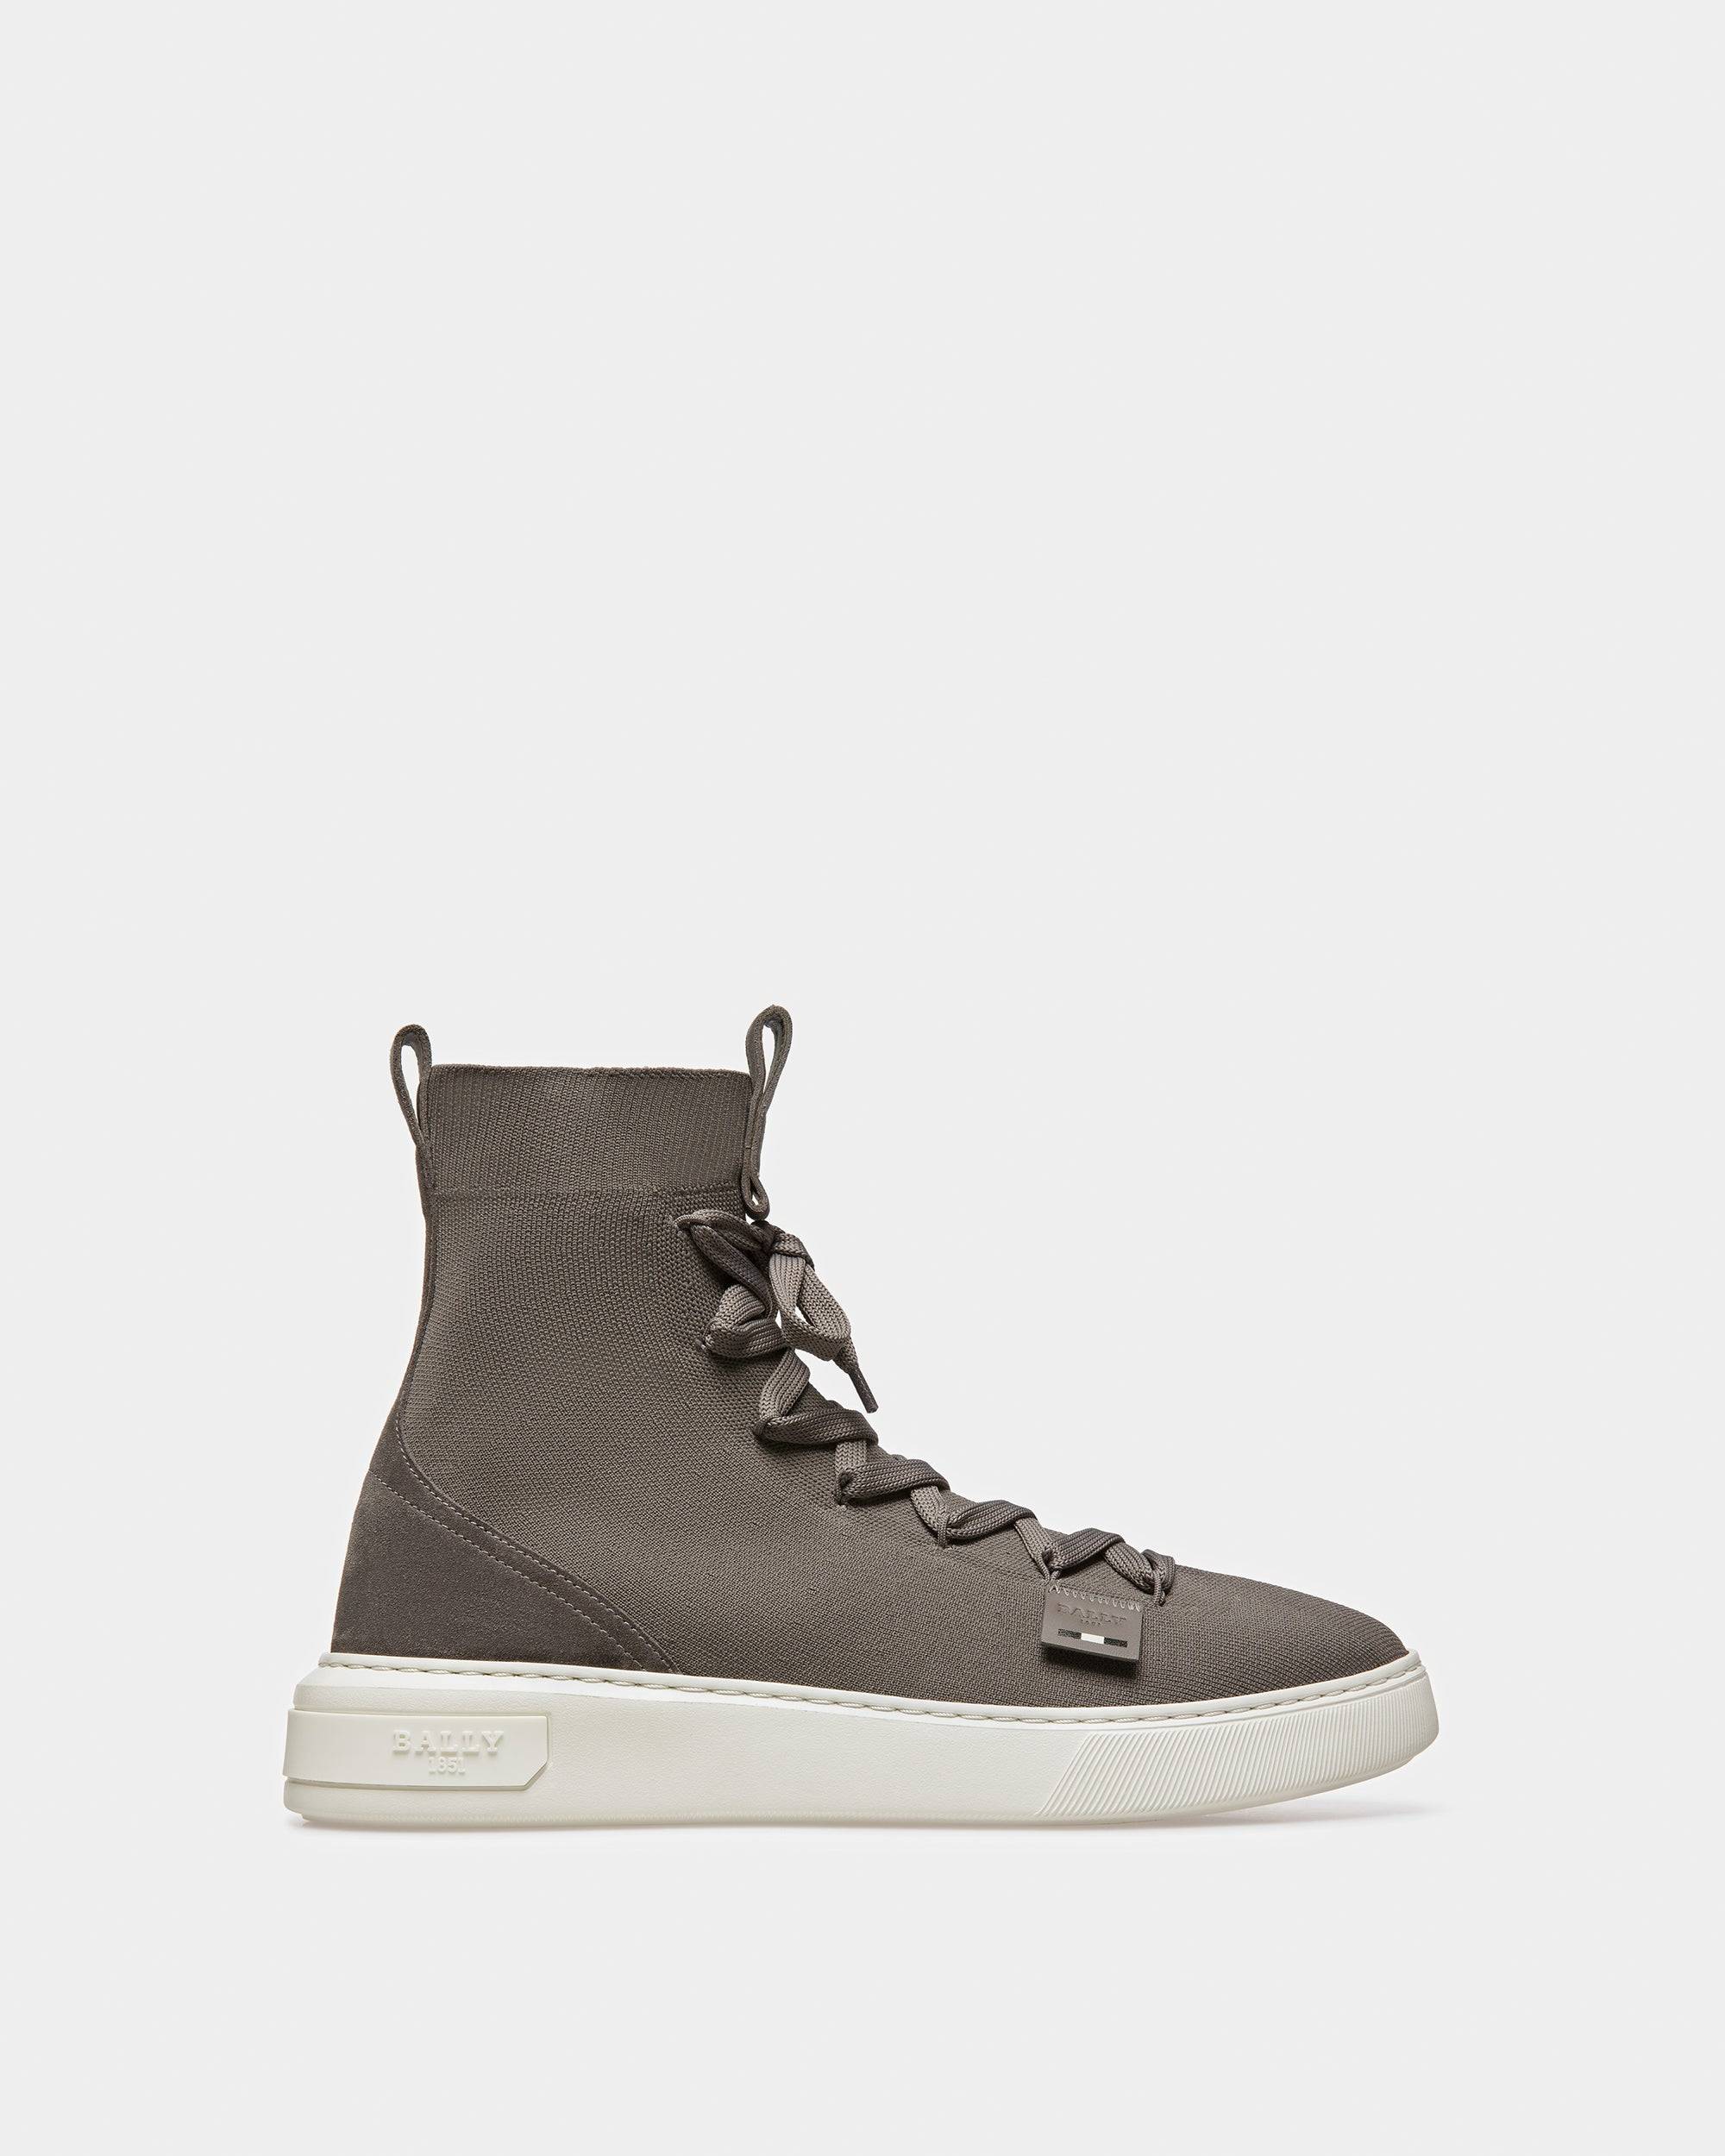 Mitys-T Sneaker In Pelle Antracite - Bally